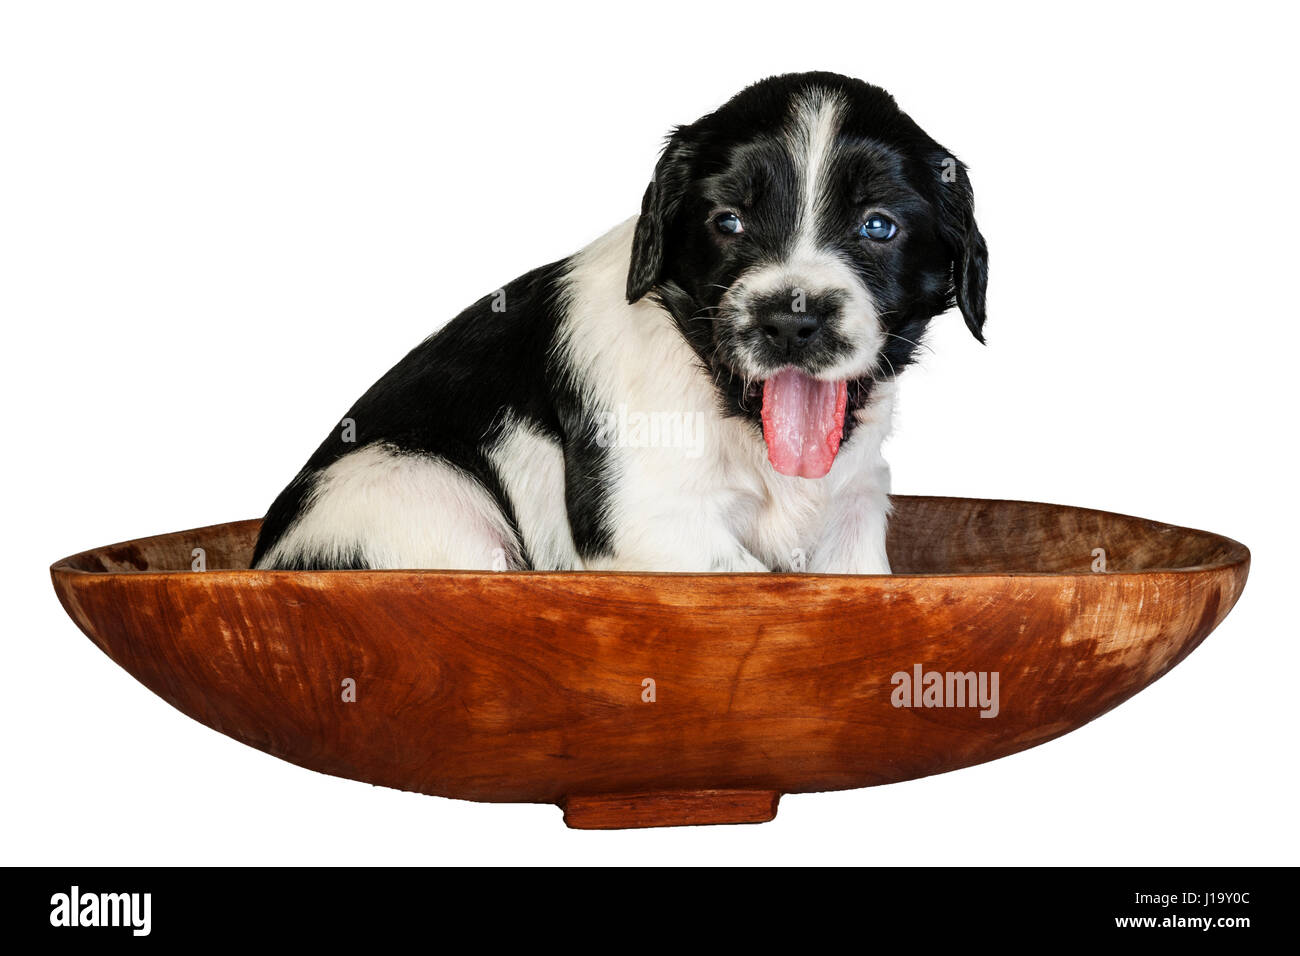 A 4 week old black and white English Springer Spaniel puppy in a basket Stock Photo